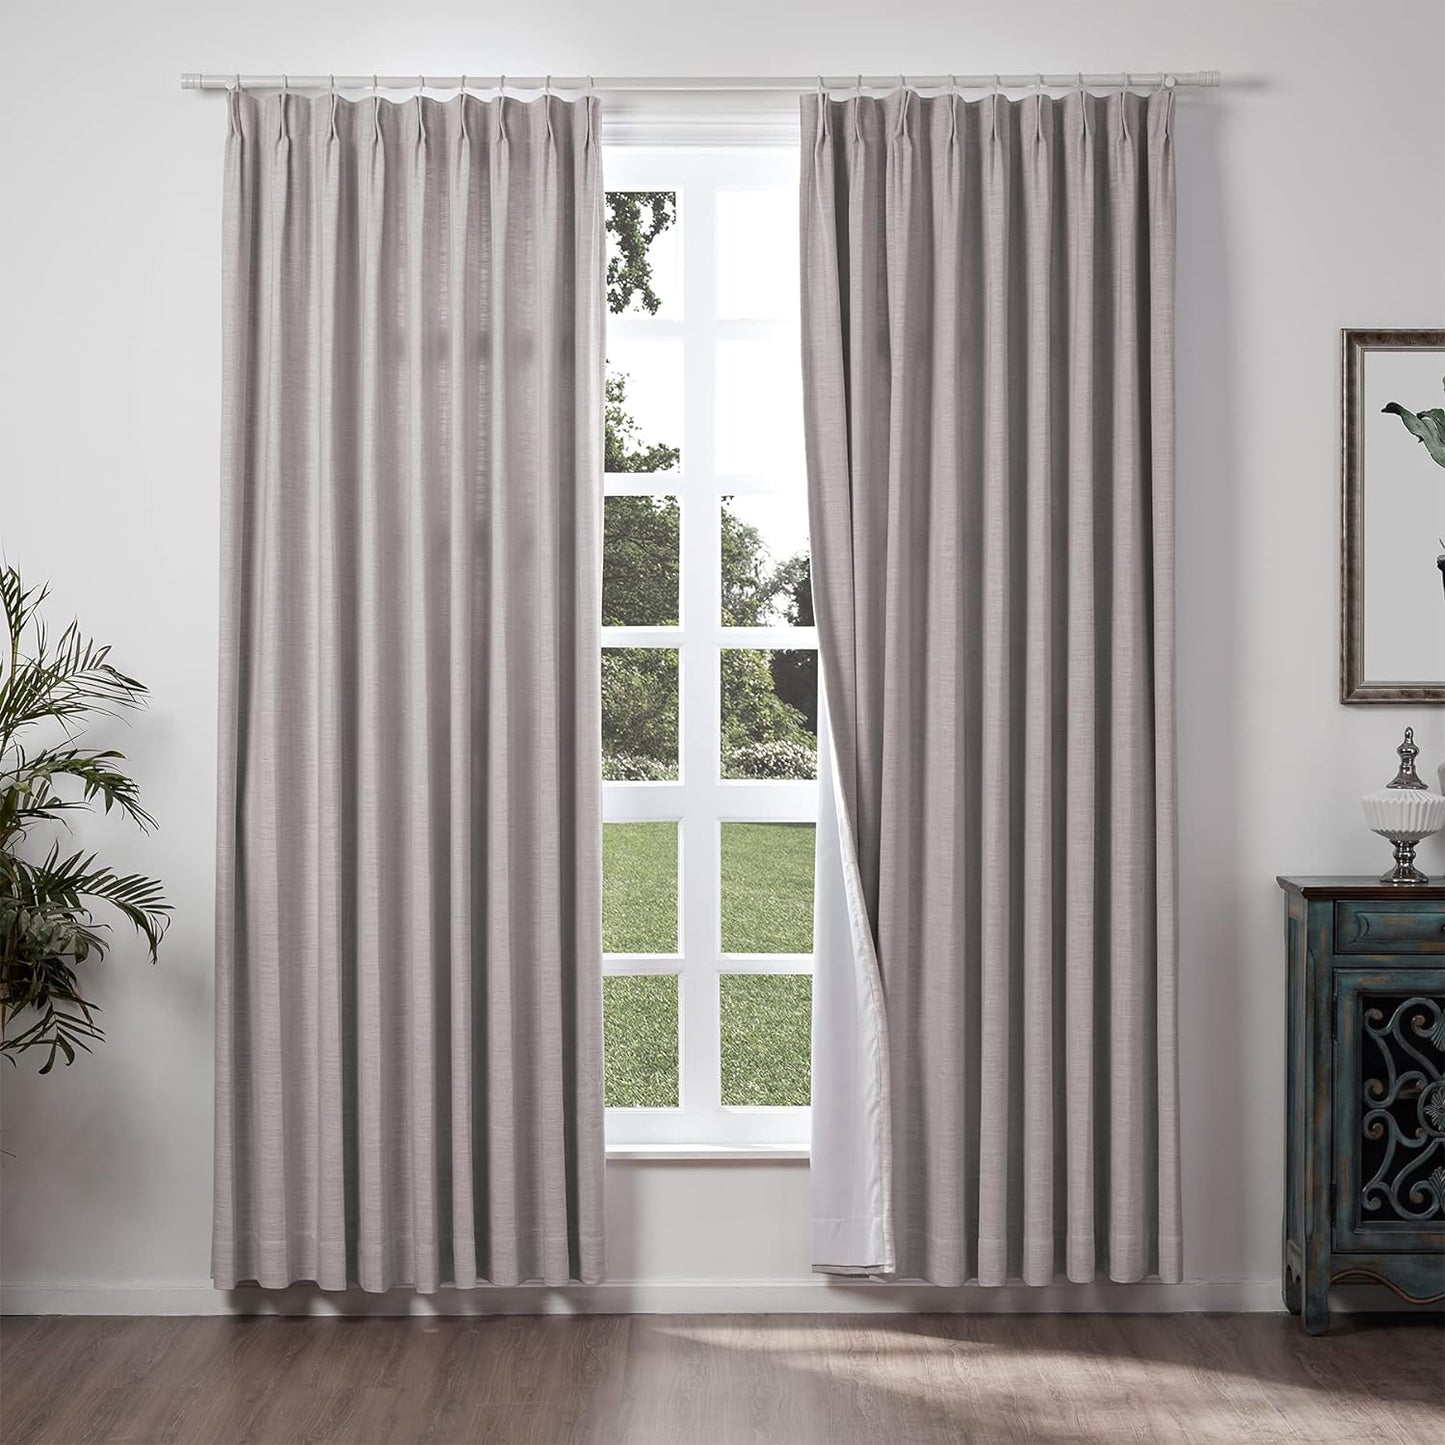 Chadmade 50" W X 84" L Polyester Linen Drape with Blackout Lining Pinch Pleat Curtain for Sliding Door Patio Door Living Room Bedroom, (1 Panel) Beige White Liz Collection  ChadMade Parchment (20) 100Wx96L 